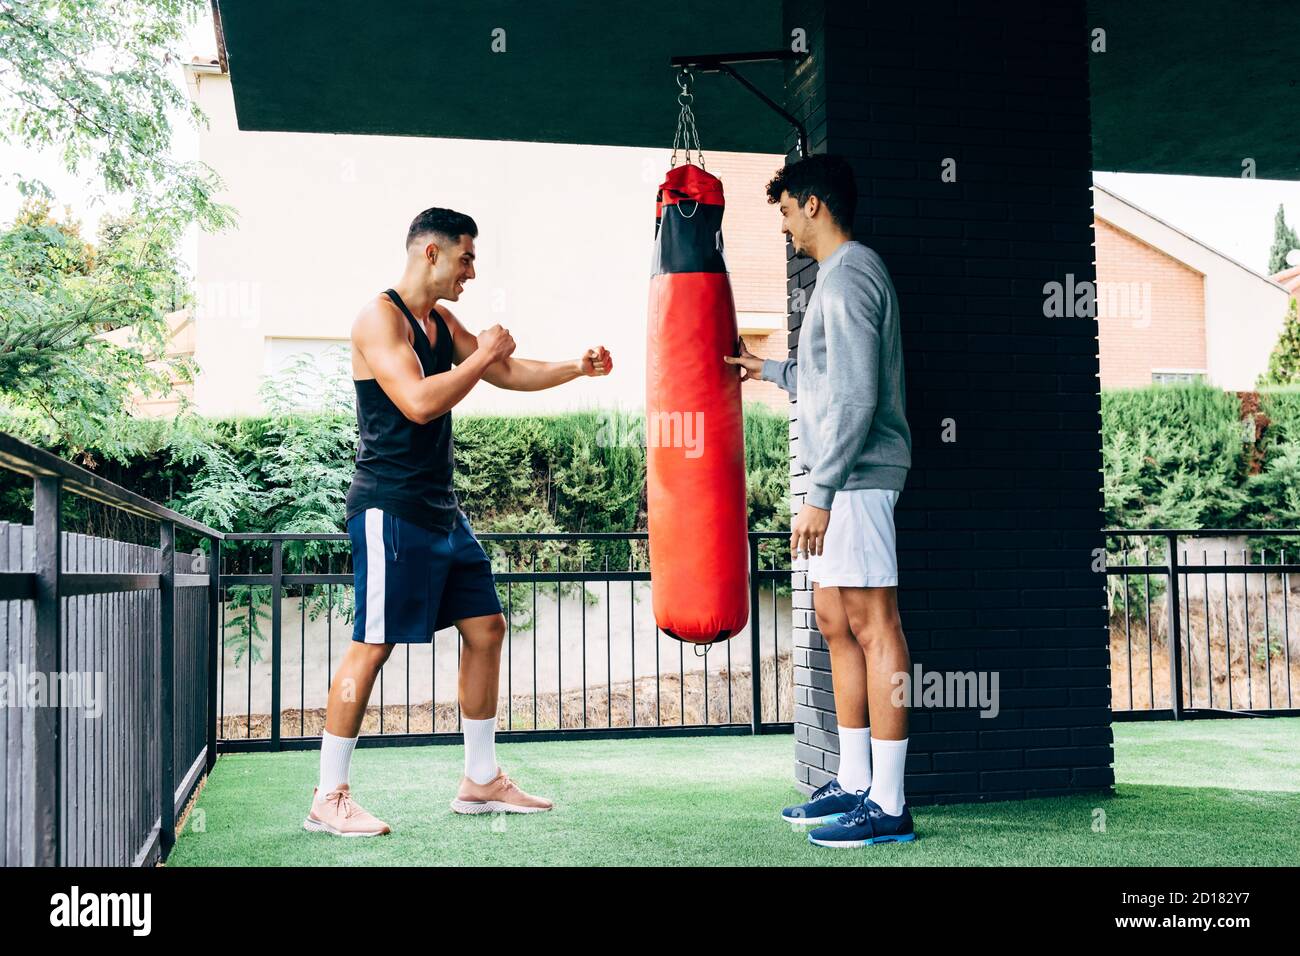 two men dressed in sportswear hit a punching bag Stock Photo